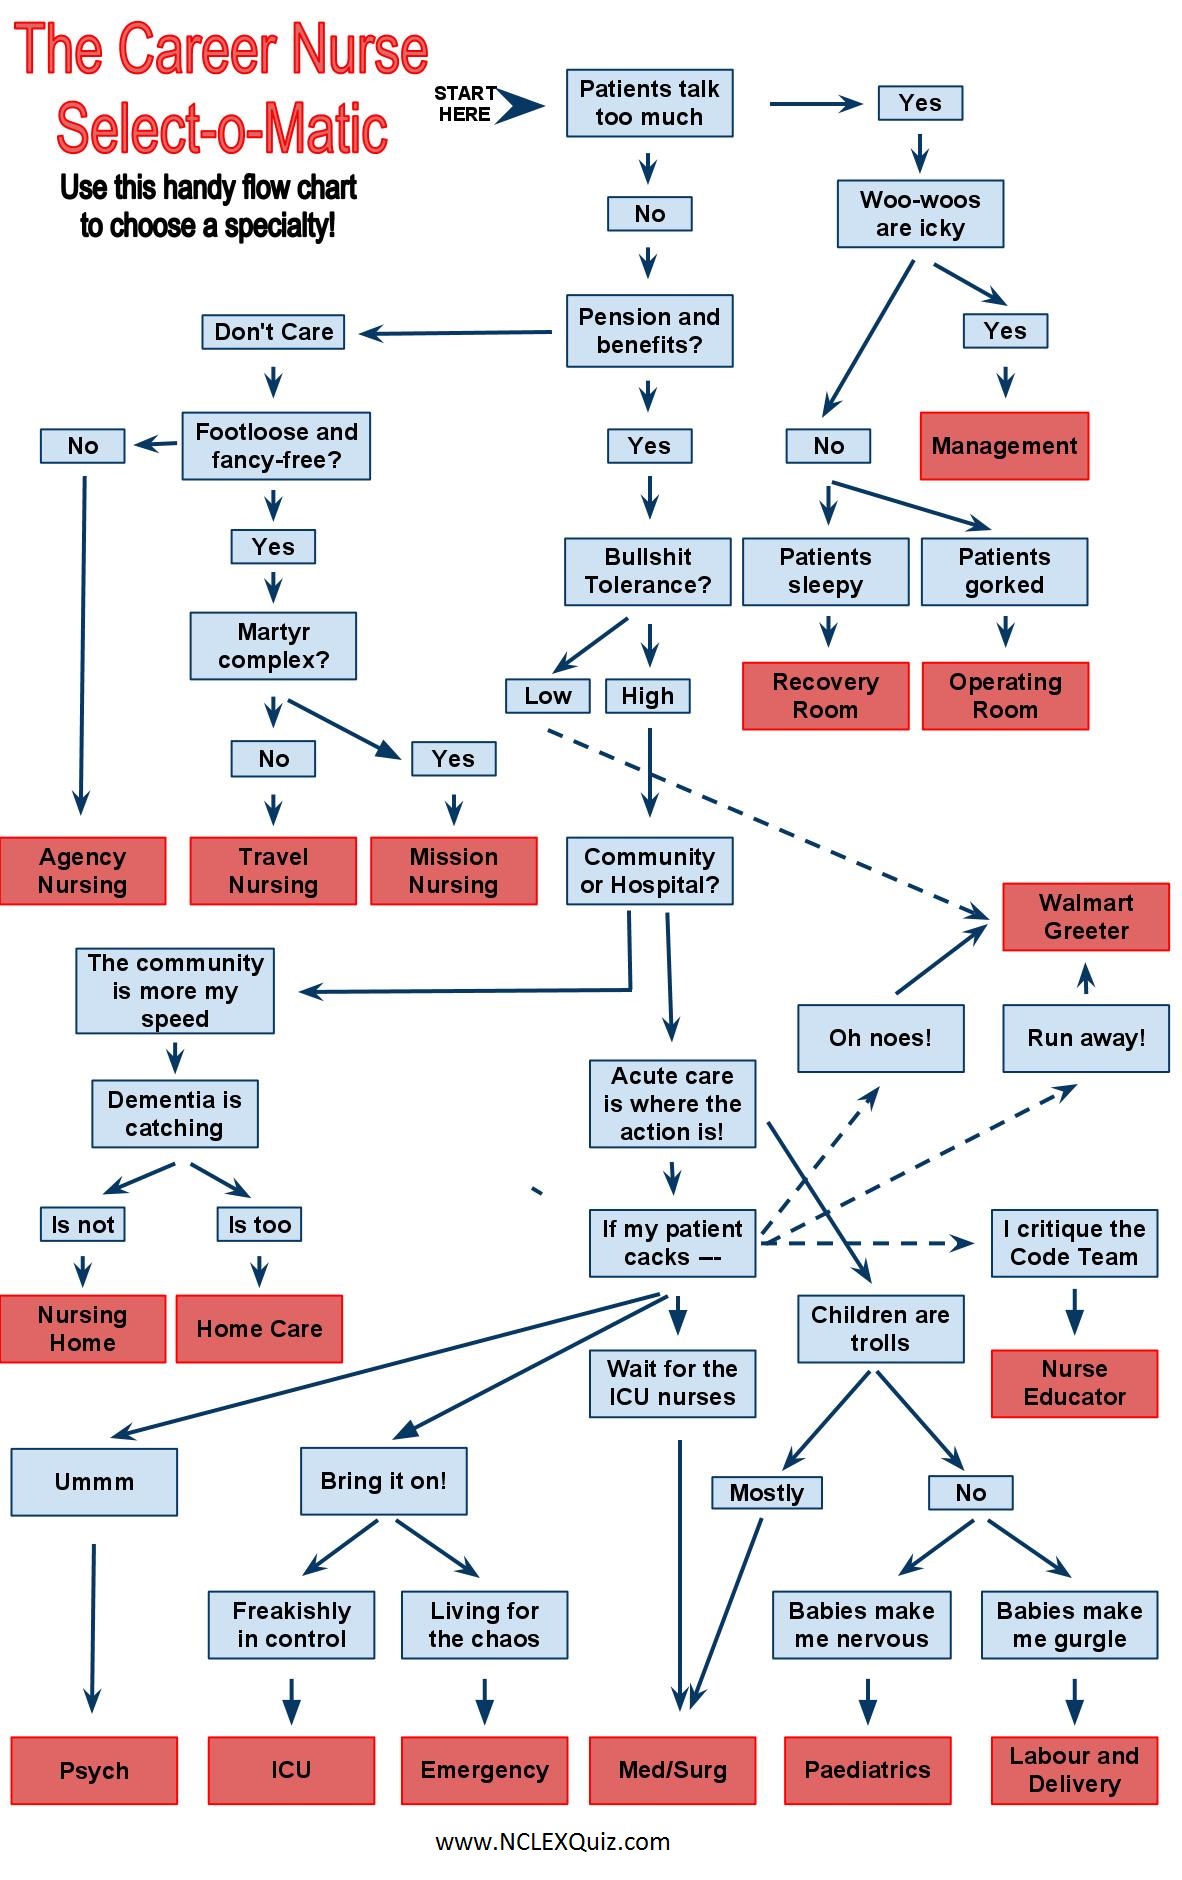 The World's Most Sophisticated Algorithm for Choosing a Med Speciality